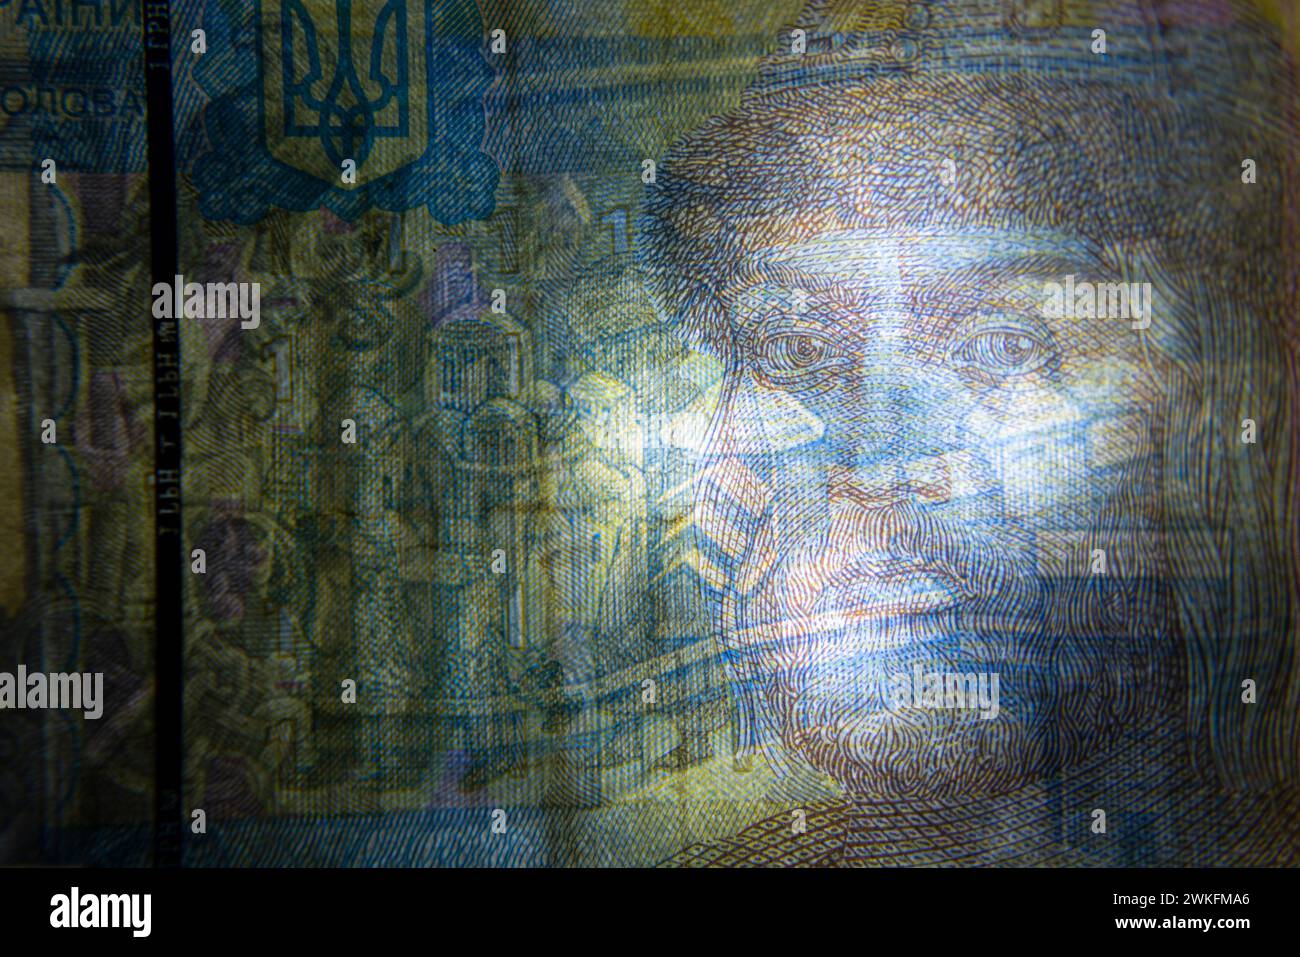 An Old banknote background, currency, great details Stock Photo